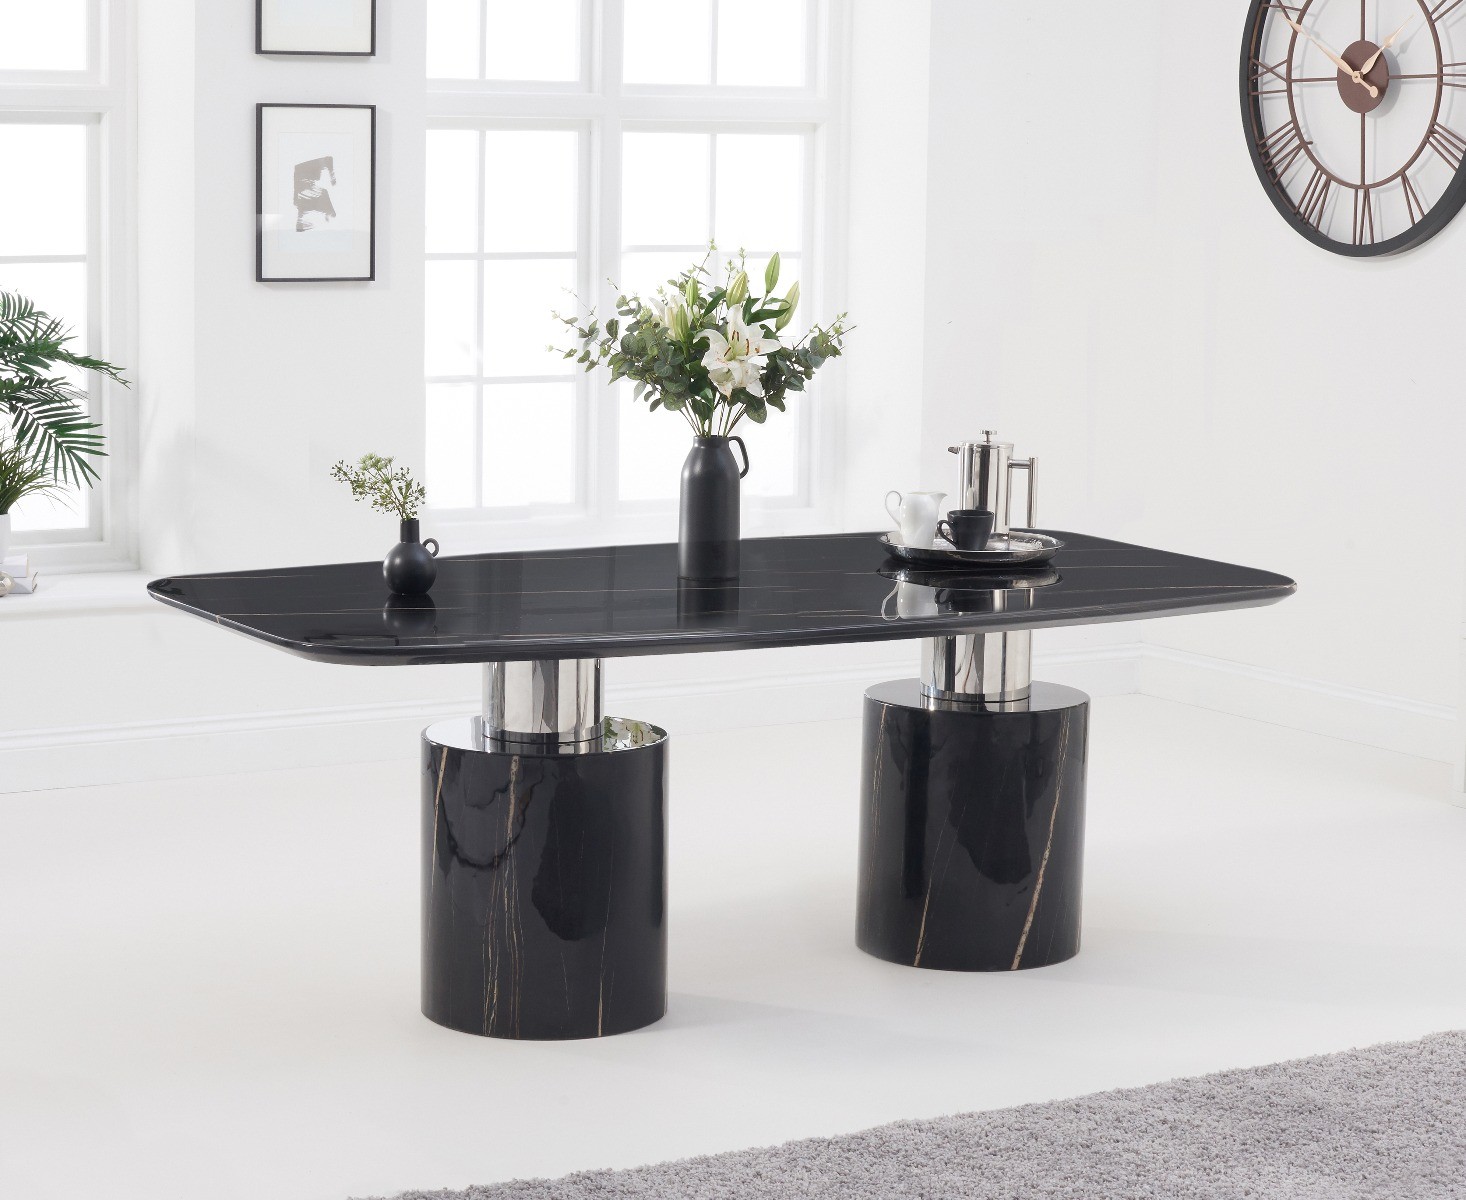 Photo 1 of Antonio 180cm black marble dining table with 6 white aldo chairs